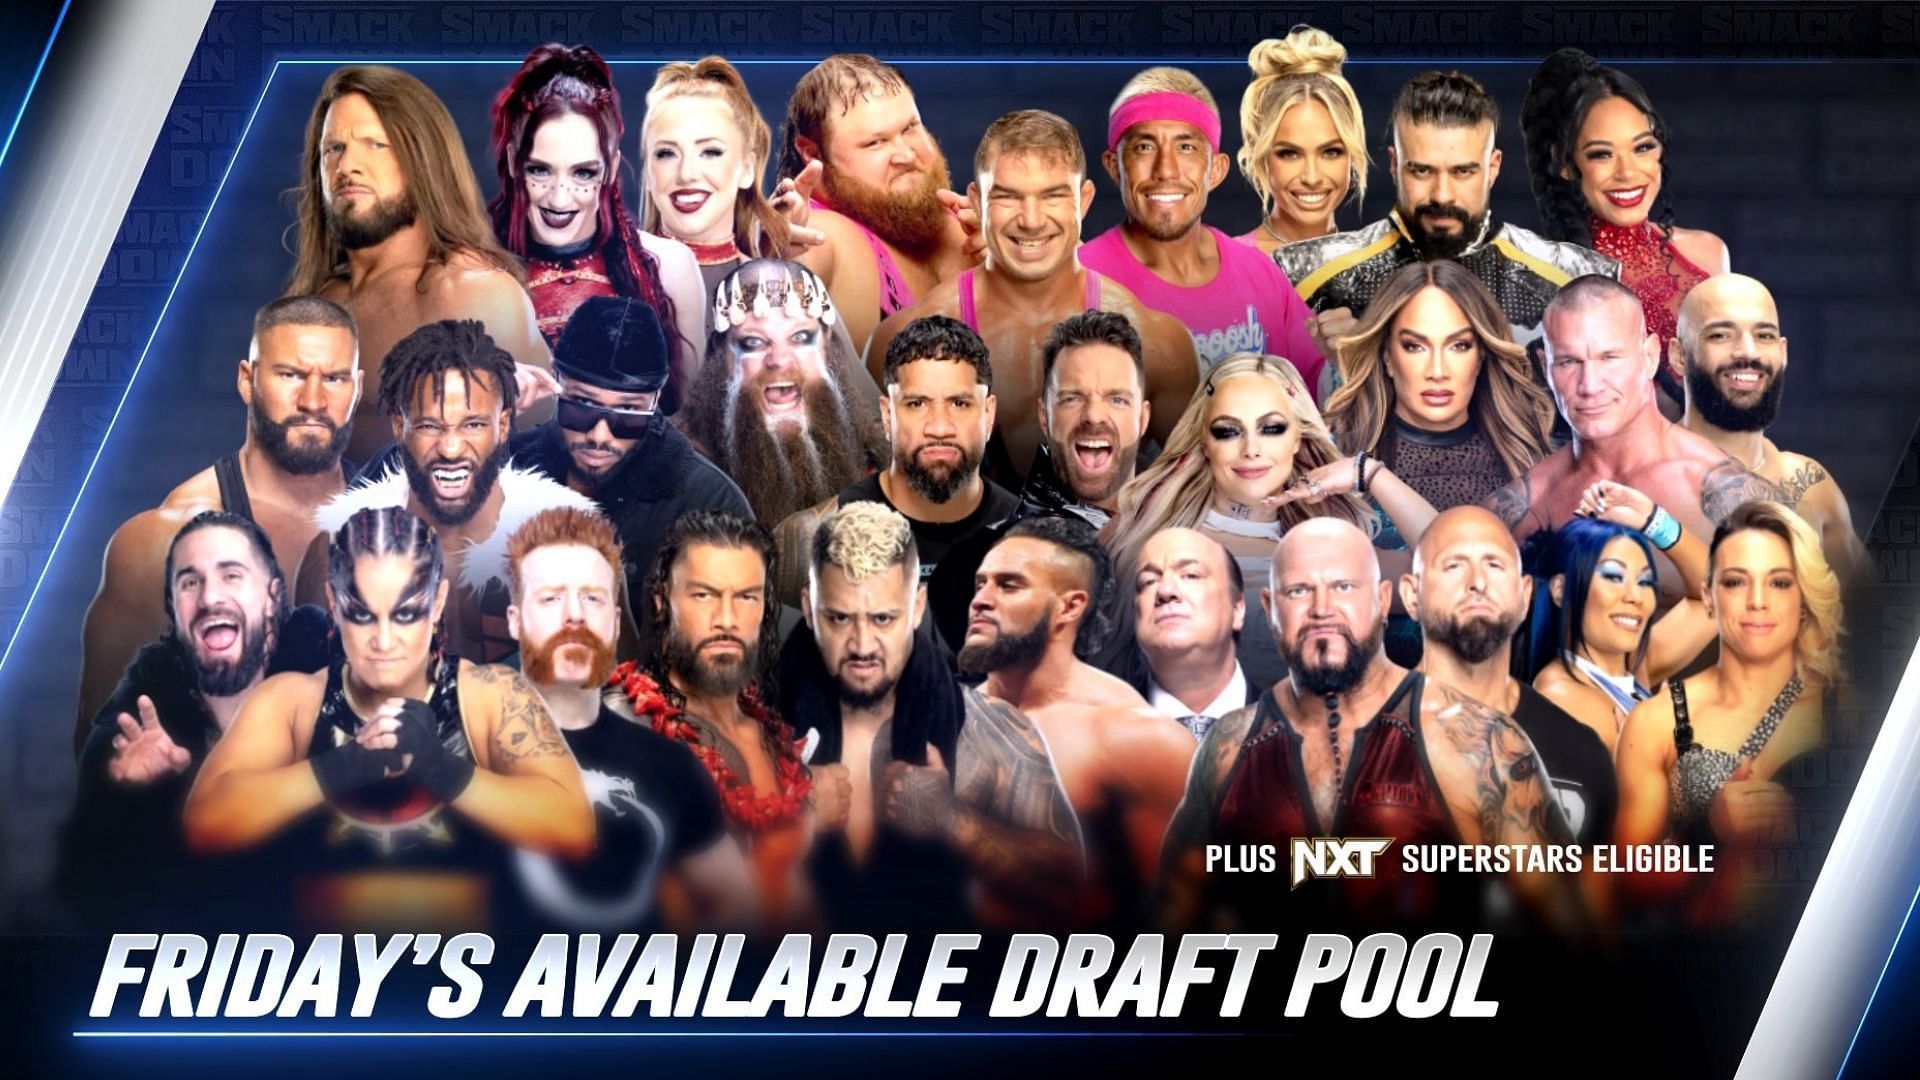 The draft will begin this Friday night on SmackDown.